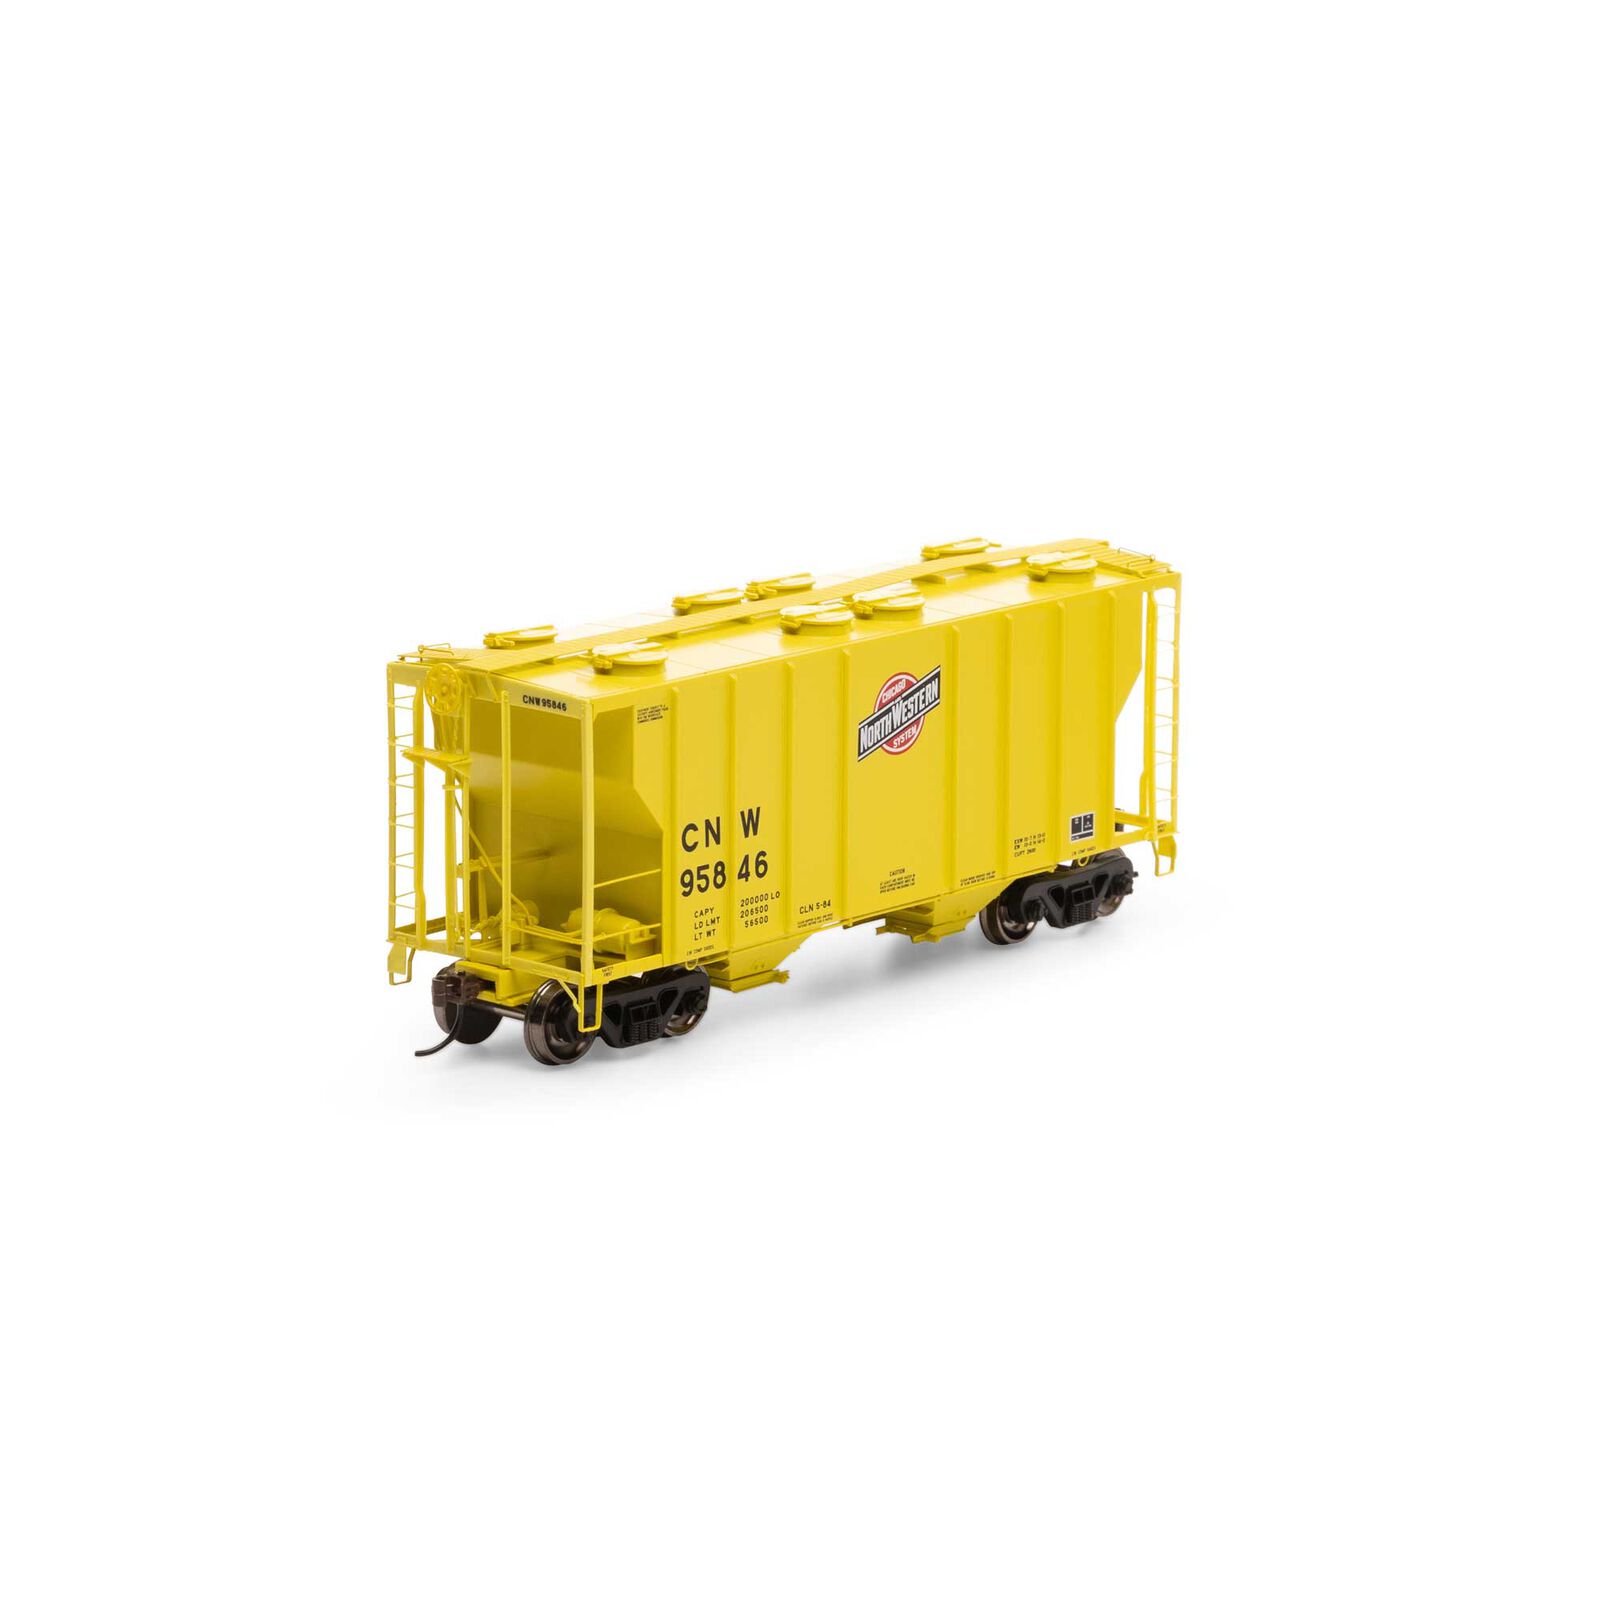 HO PS-2 2600 Covered Hopper, C&NW #95846